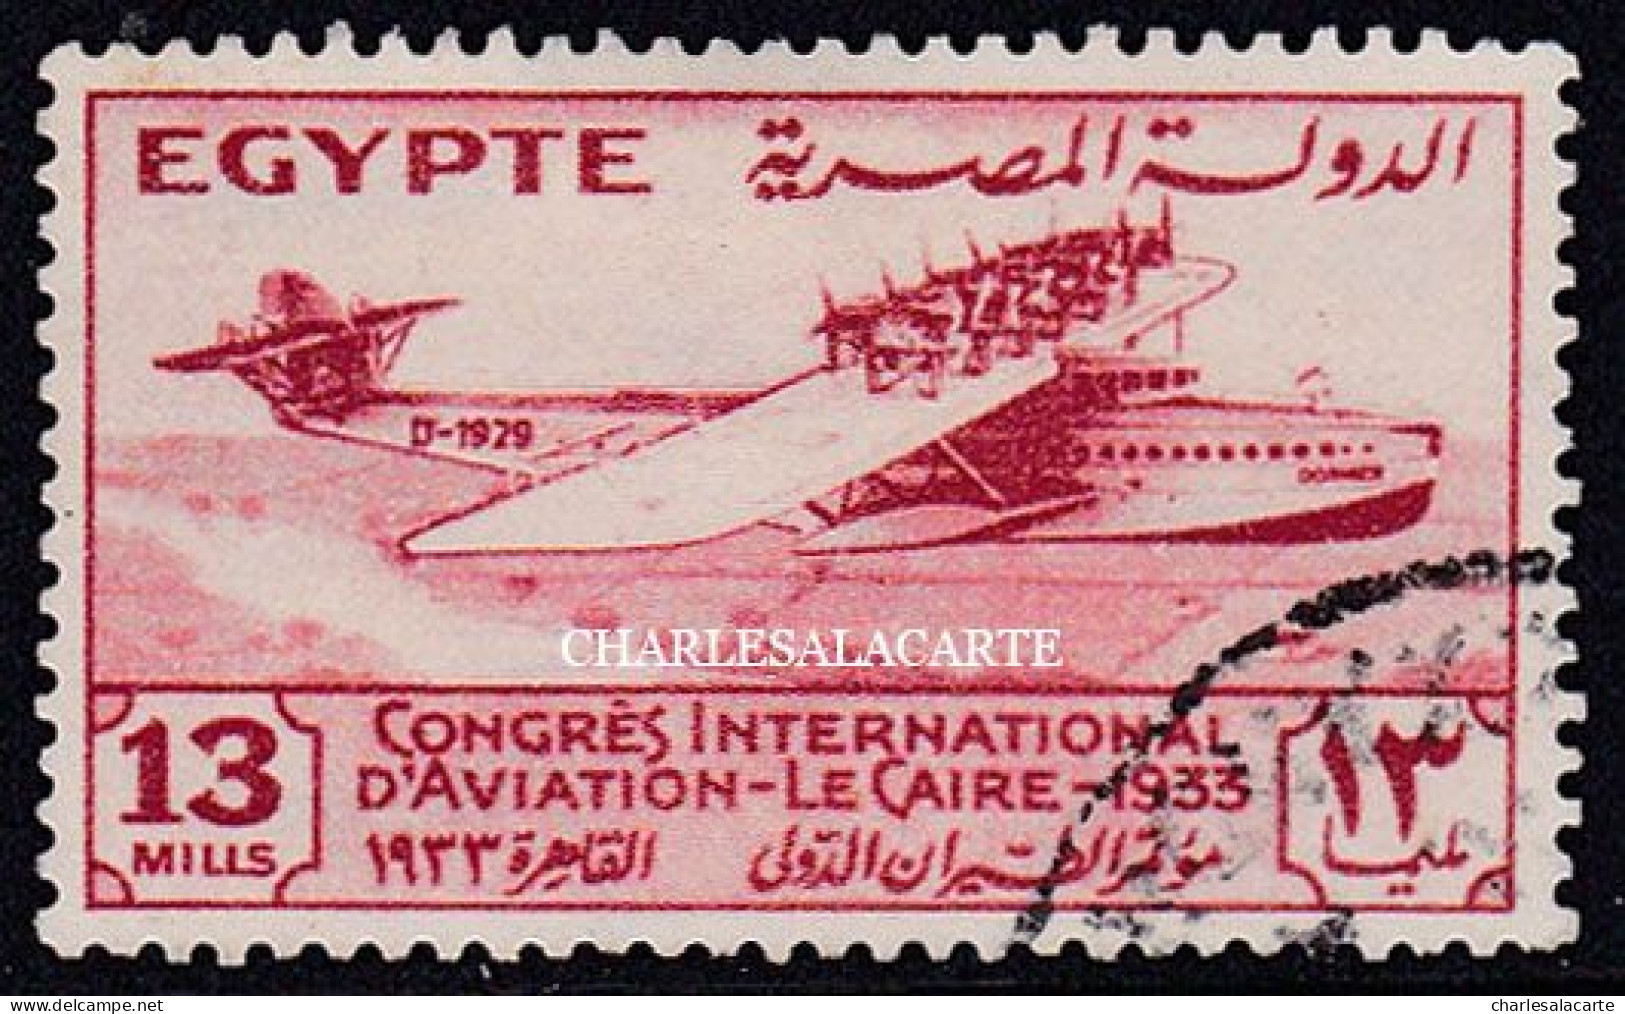 EGYPT  KINGDOM  1933  INTERNATIONAL AVIATION CONGRESS  13m. RED   S.G. 216  VERY FINE USED - Used Stamps